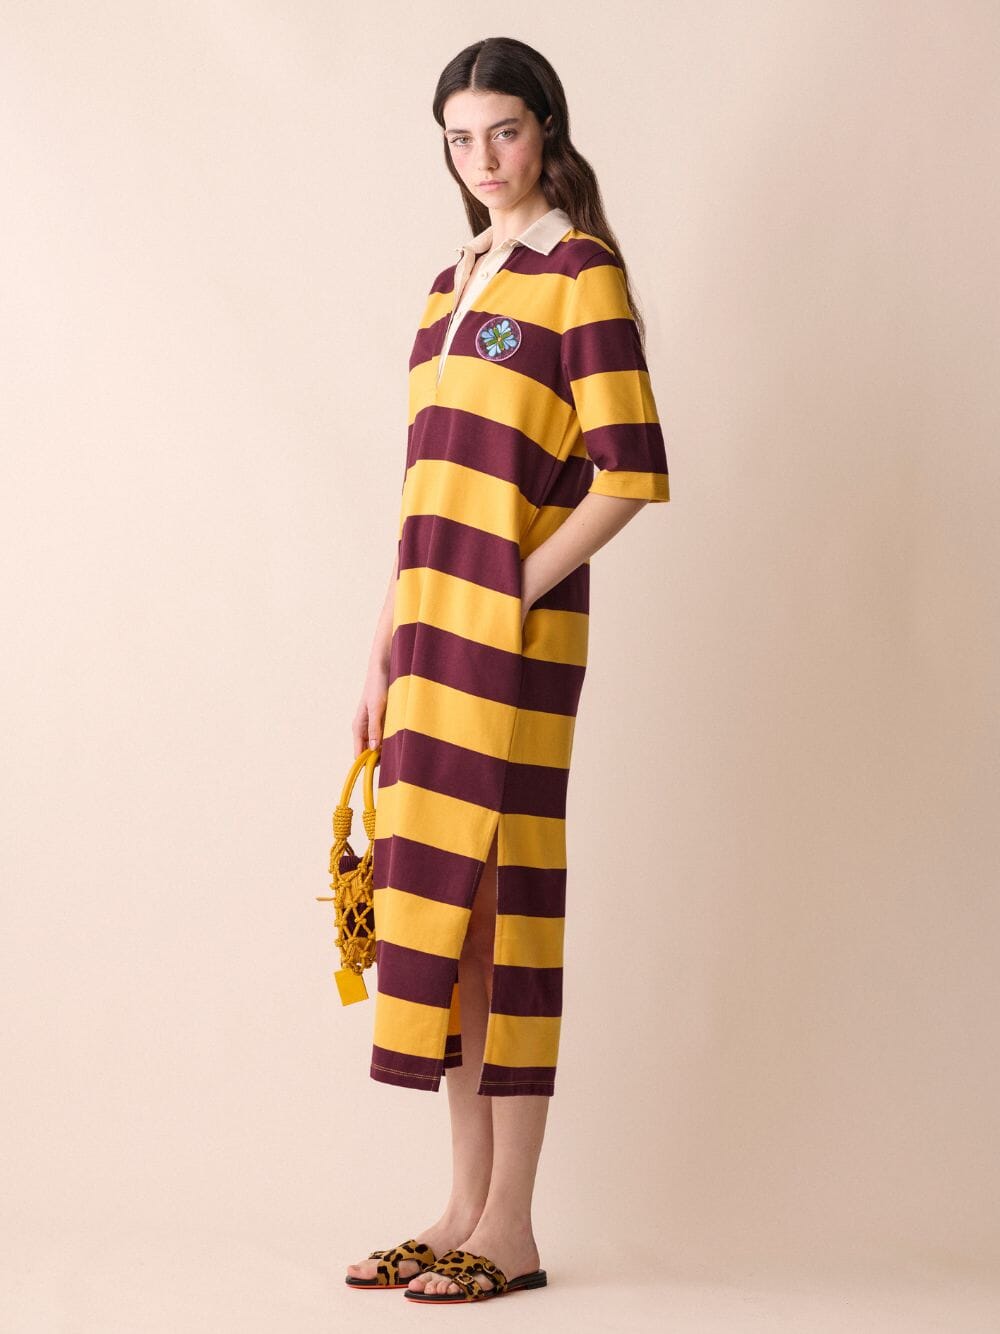 Cetus Striped Polo Dress With Embroidered Patch